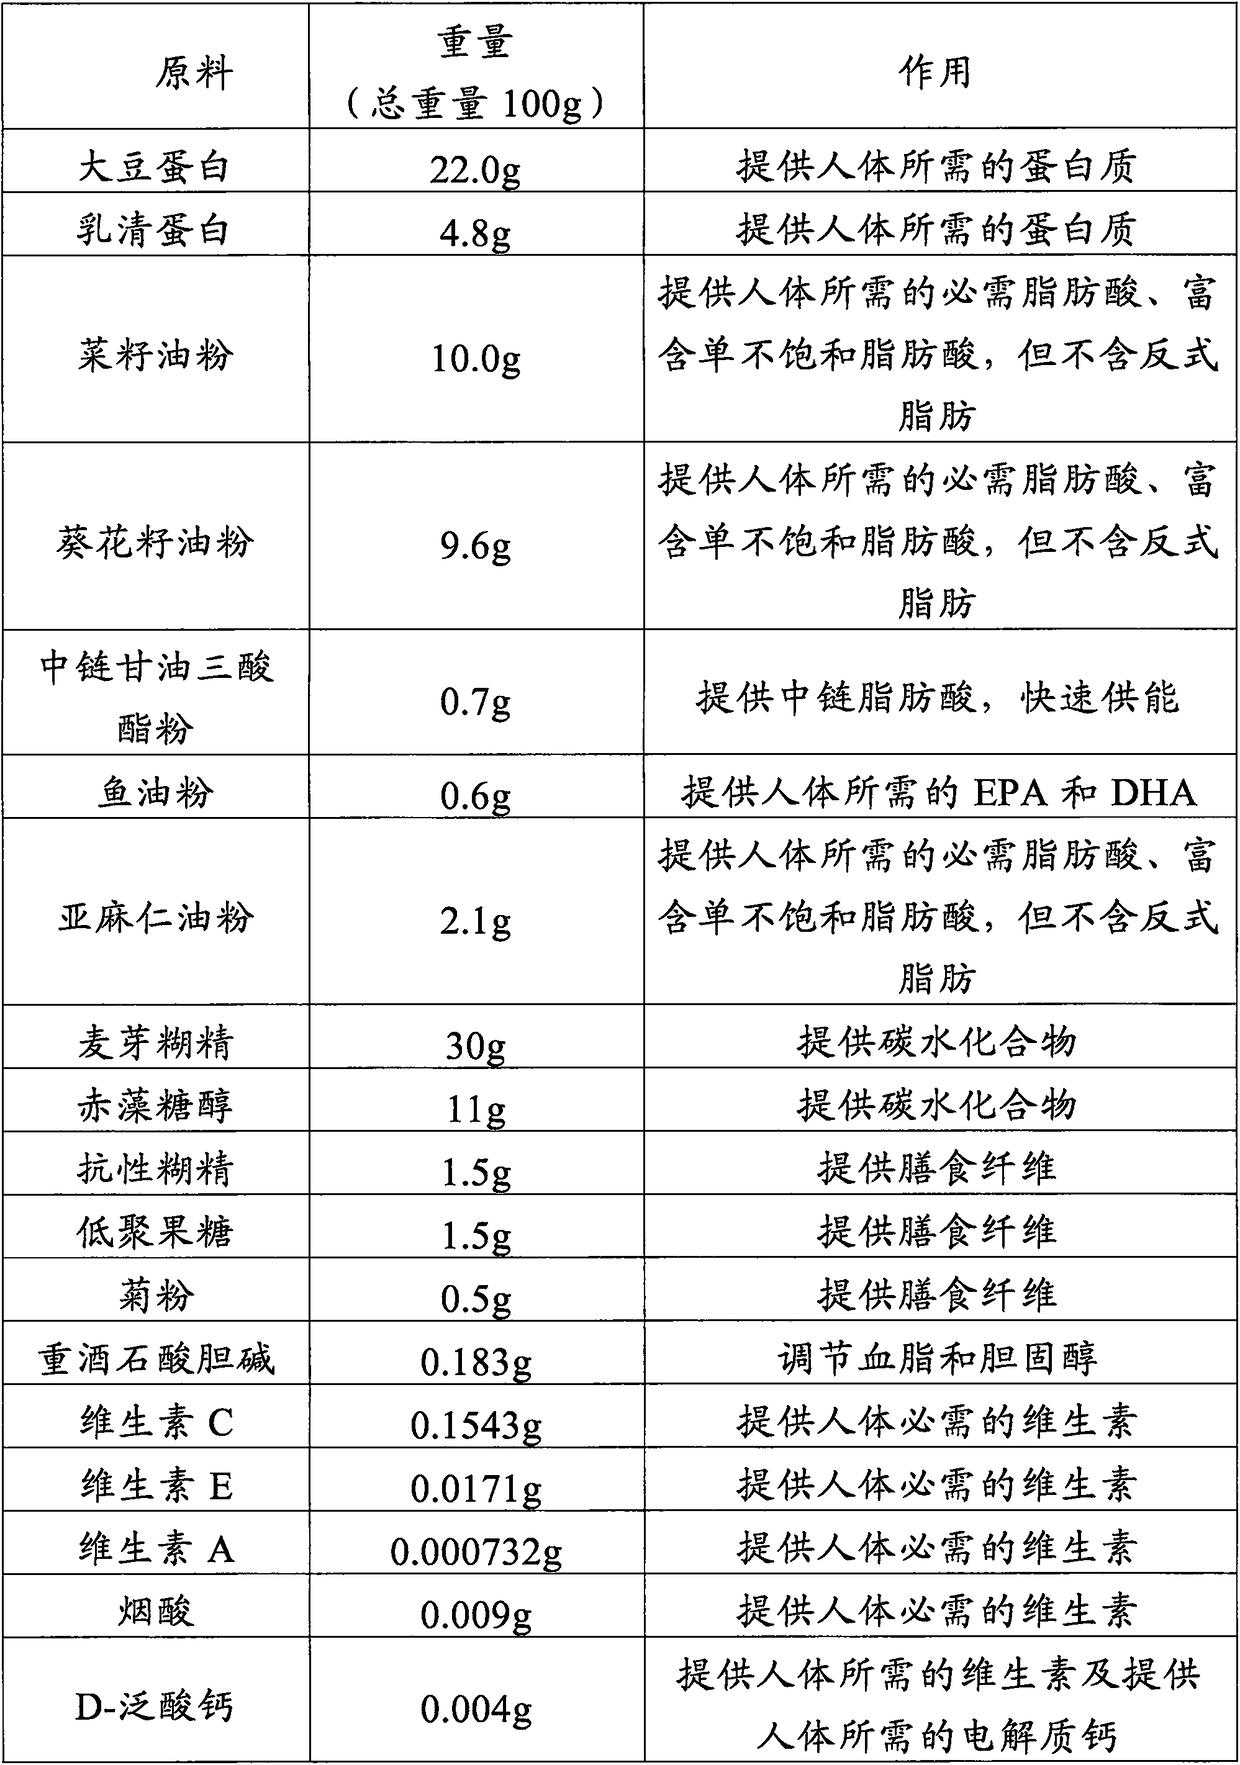 Full-nutrition formula powder for patients with tumors and preparation method of full-nutrition formula powder